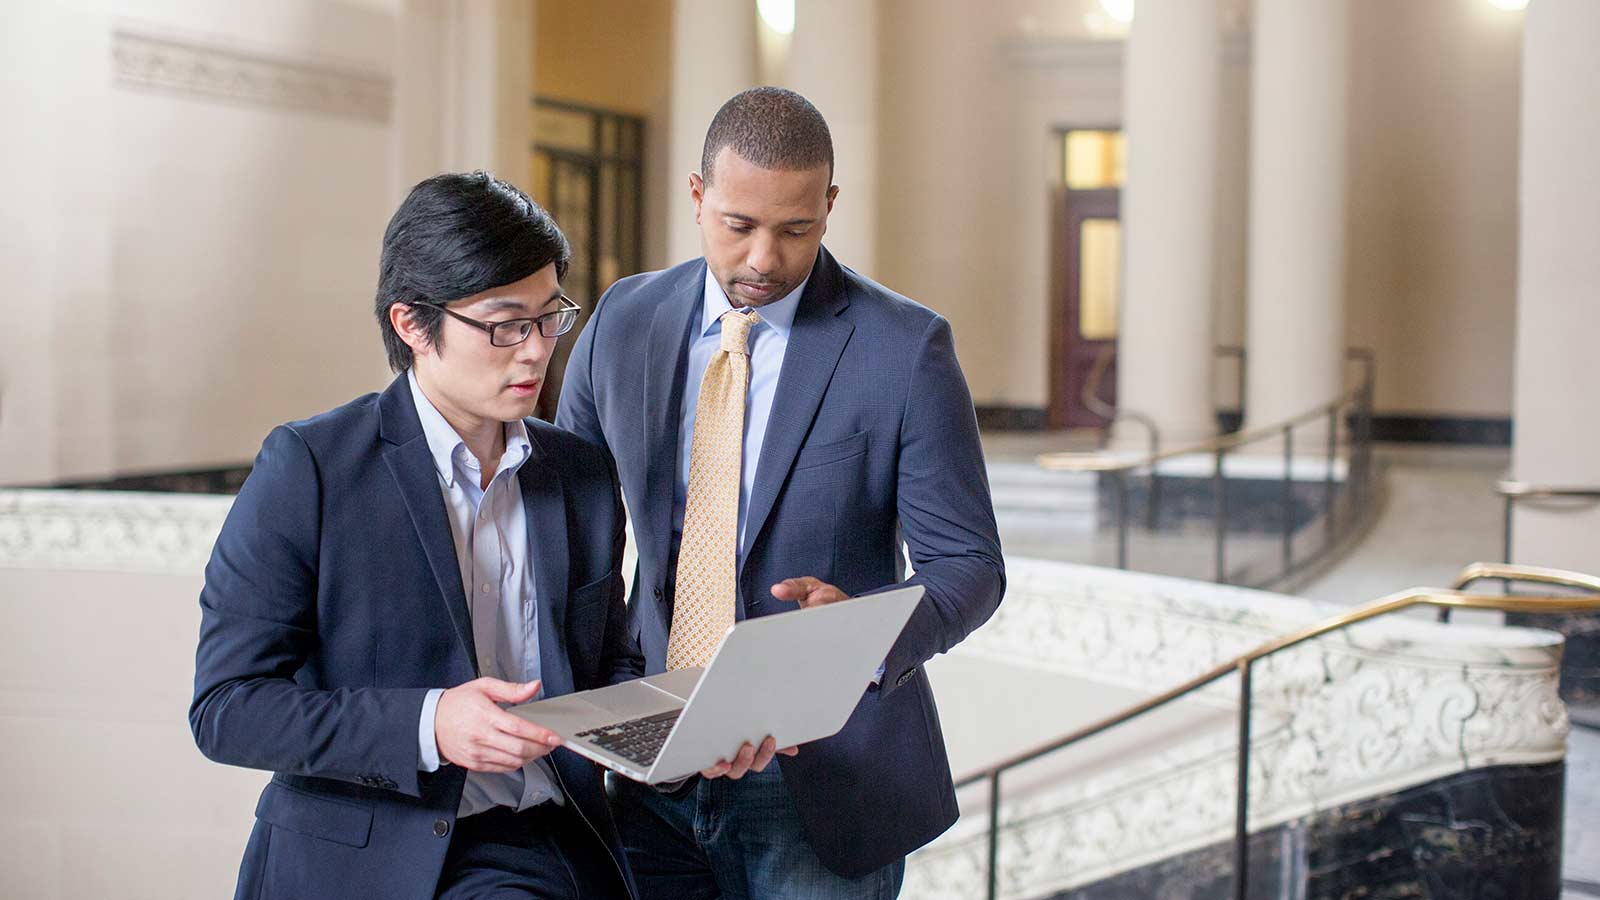 Two business men standing and conversing while looking at a laptop.